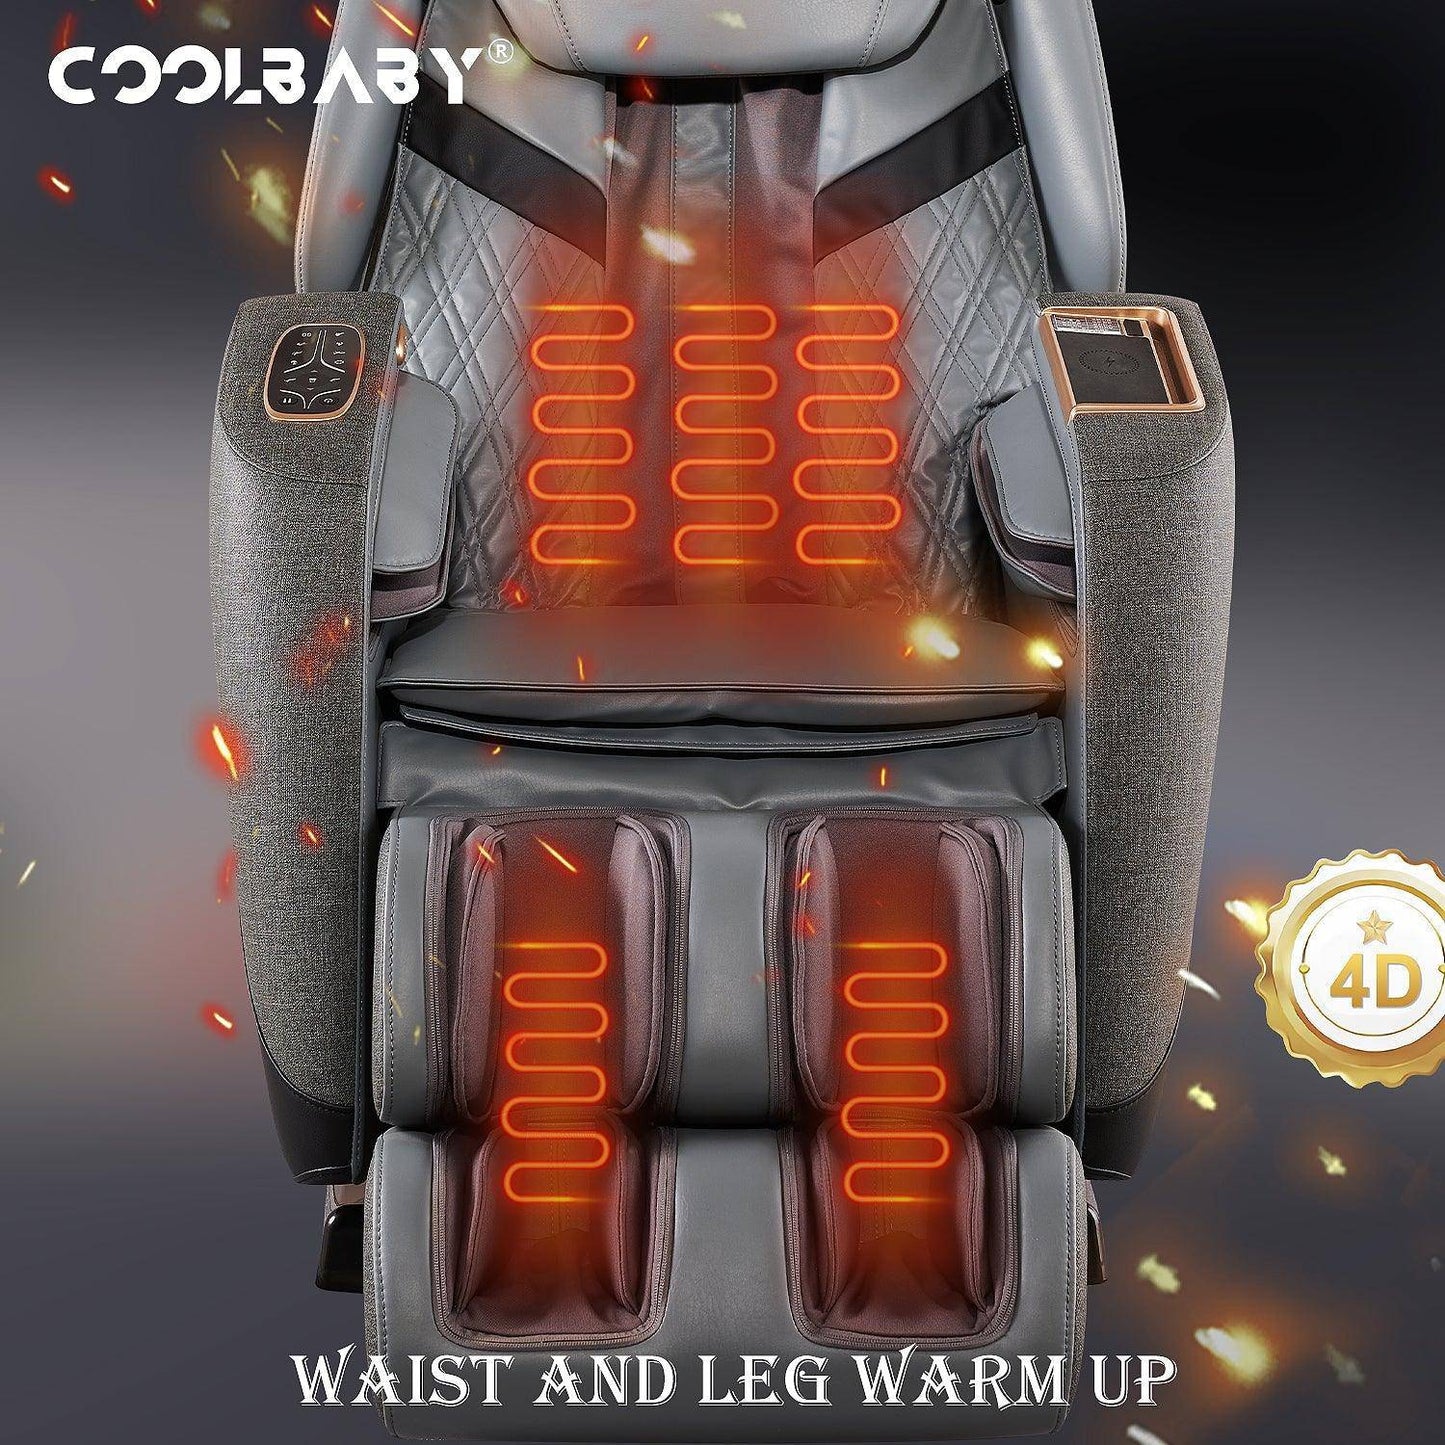 COOLBABY® RK-1912 Massage Chair - Home Office Luxury Capsule Chair - CoolBabyMass